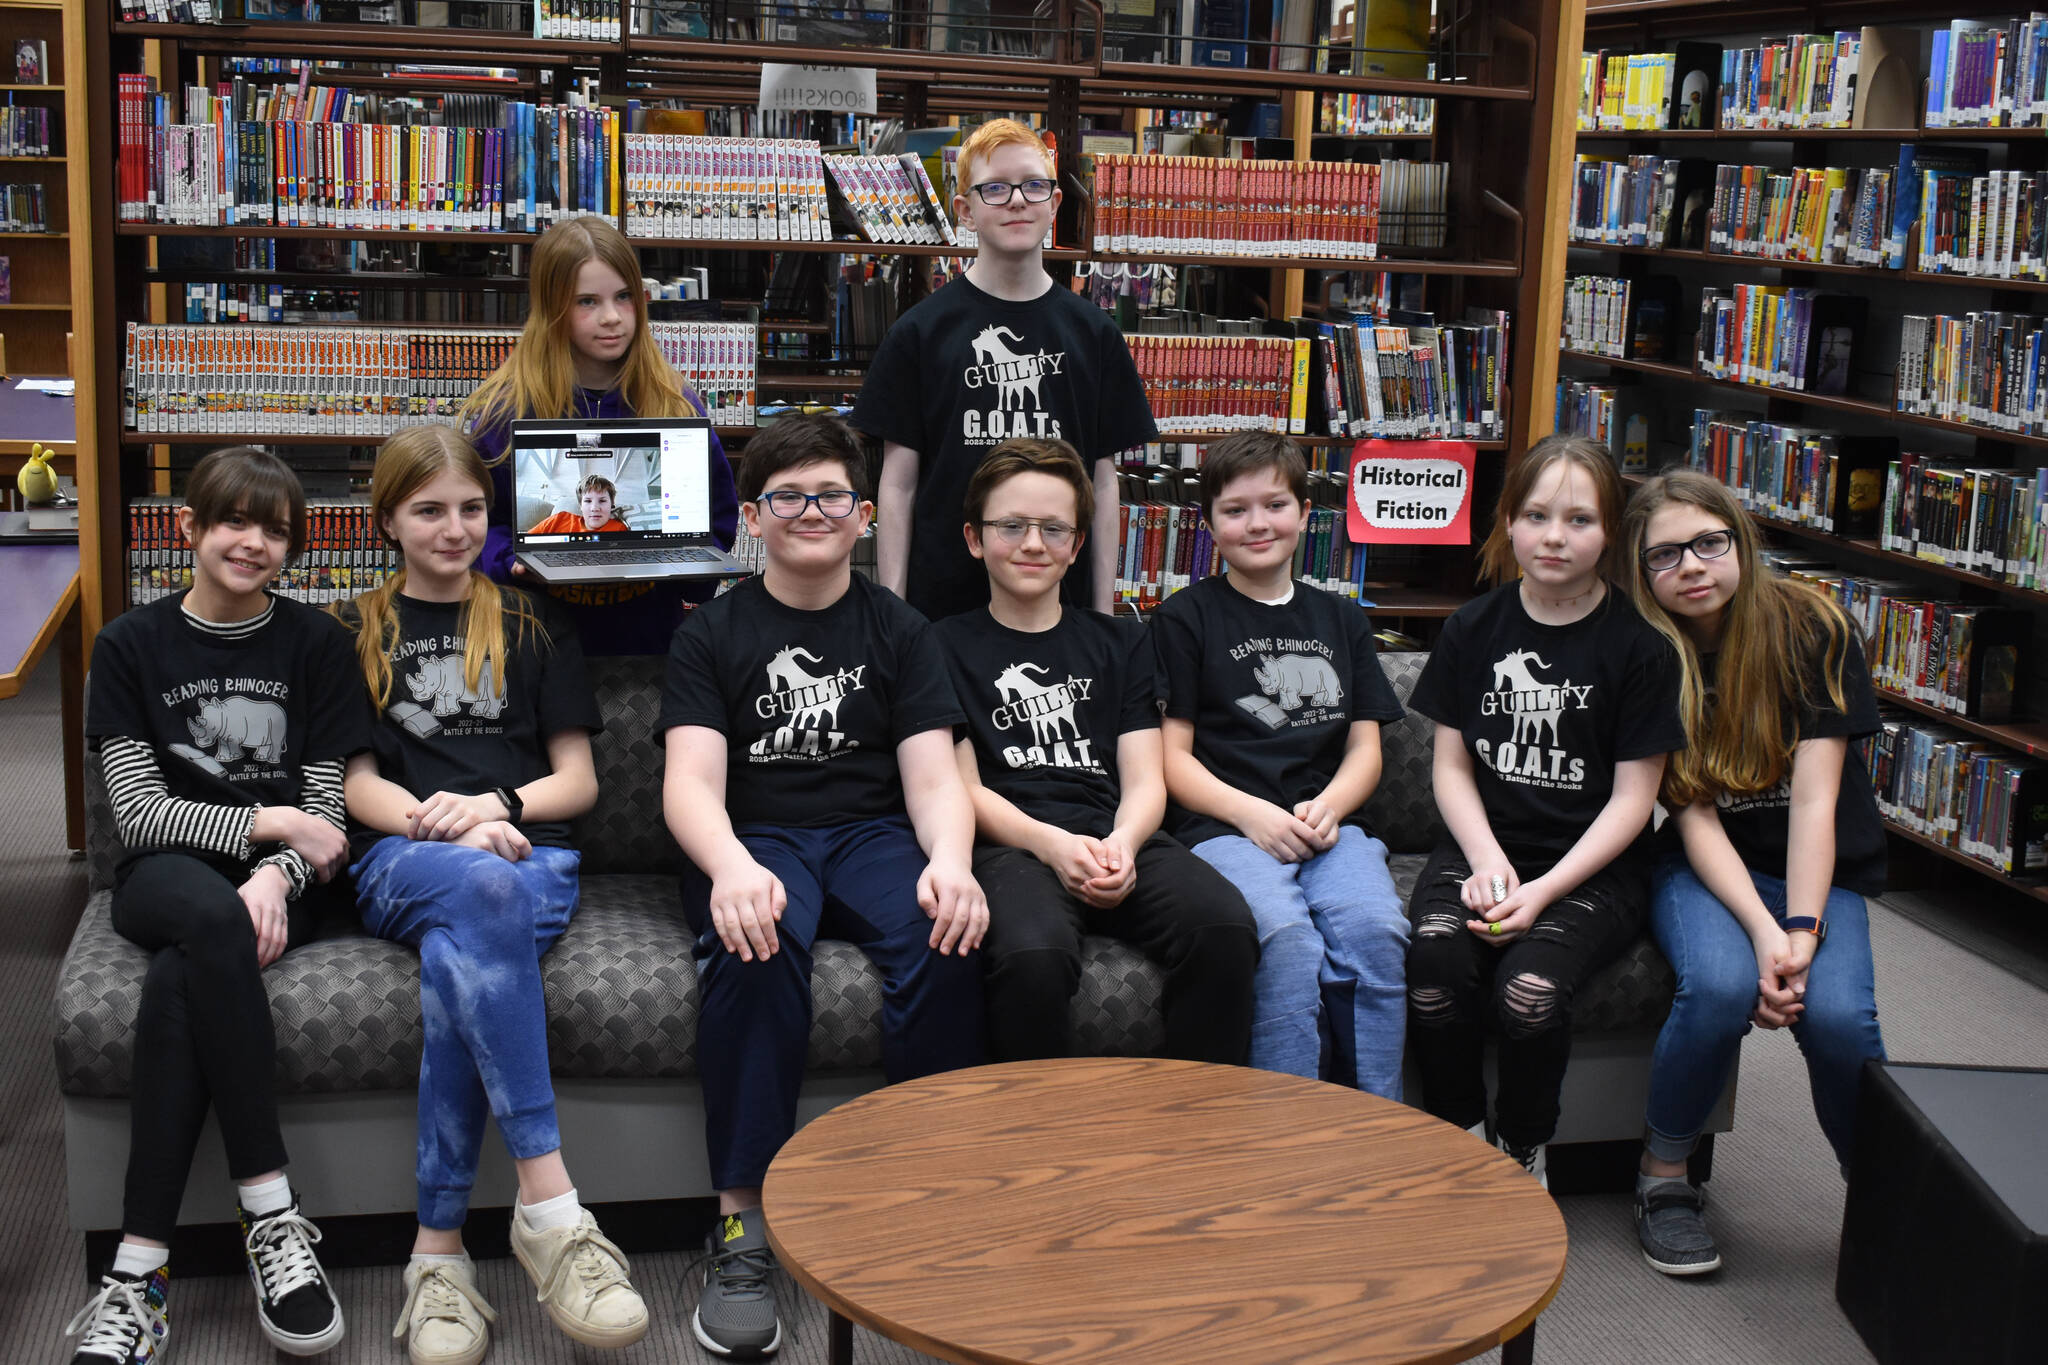 Kenai Middle School Battle of the Books teams, the Reading Rhinoceri and the Guilty GOATs, gather for a photo after their first match during Kenai Peninsula Borough School District Middle School Battle of the Books competition on Thursday, Feb. 9, 2023, at Kenai Middle School in Kenai, Alaska. (Jake Dye/Peninsula Clarion)